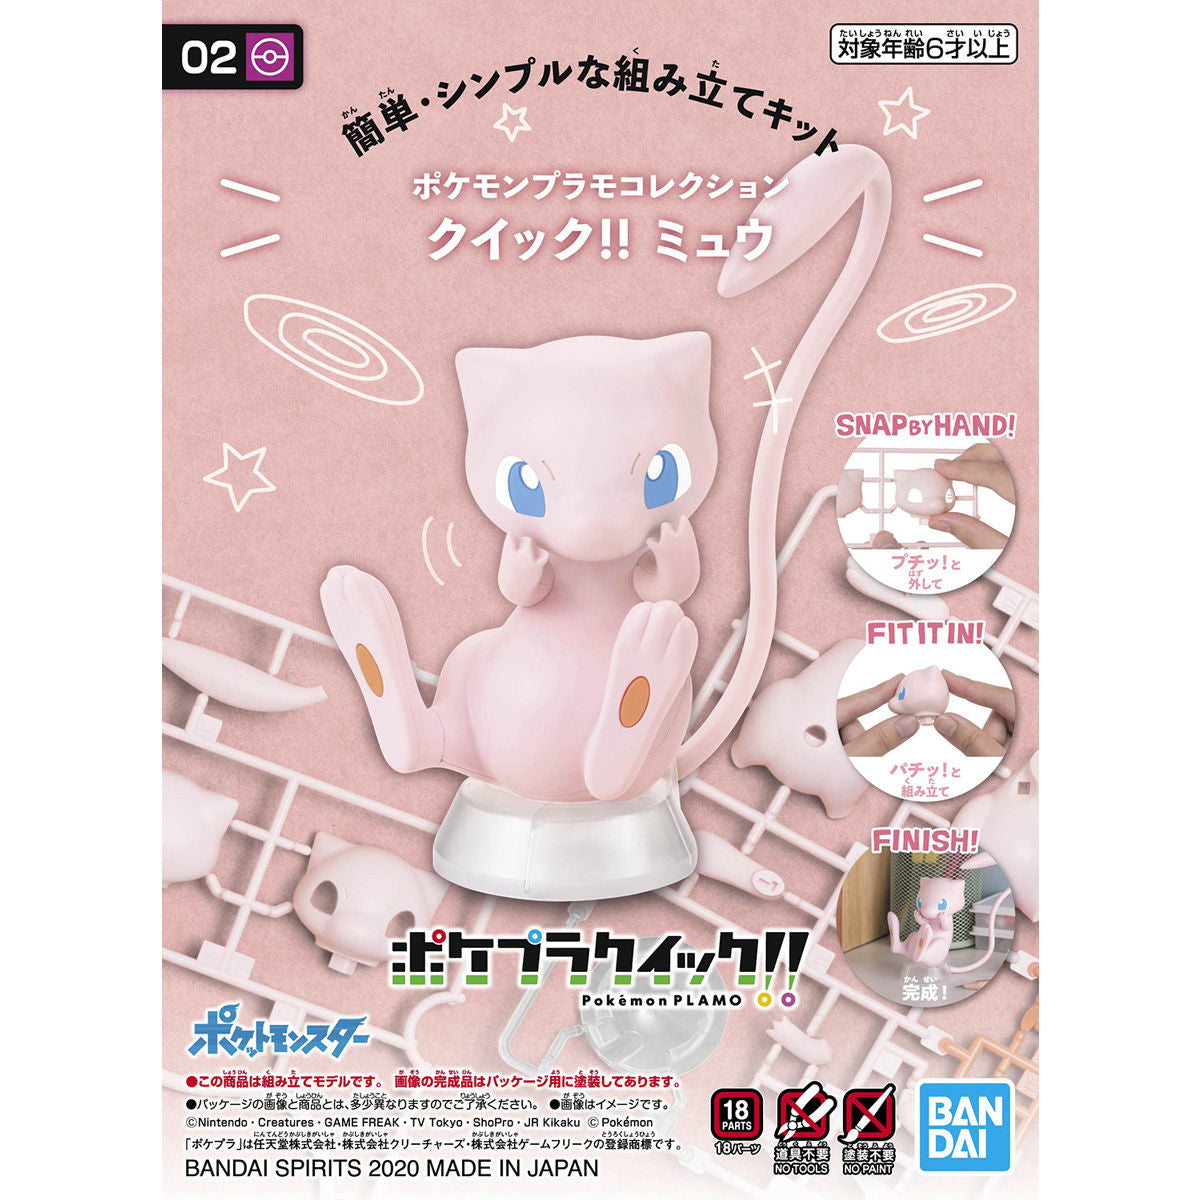 Pokémon - Mew - Pokémon Model Kit Quick!! Collection No. 02 (Bandai), Easy and simple assembly with Mew figure, Foil sticker included, Nippon Figures